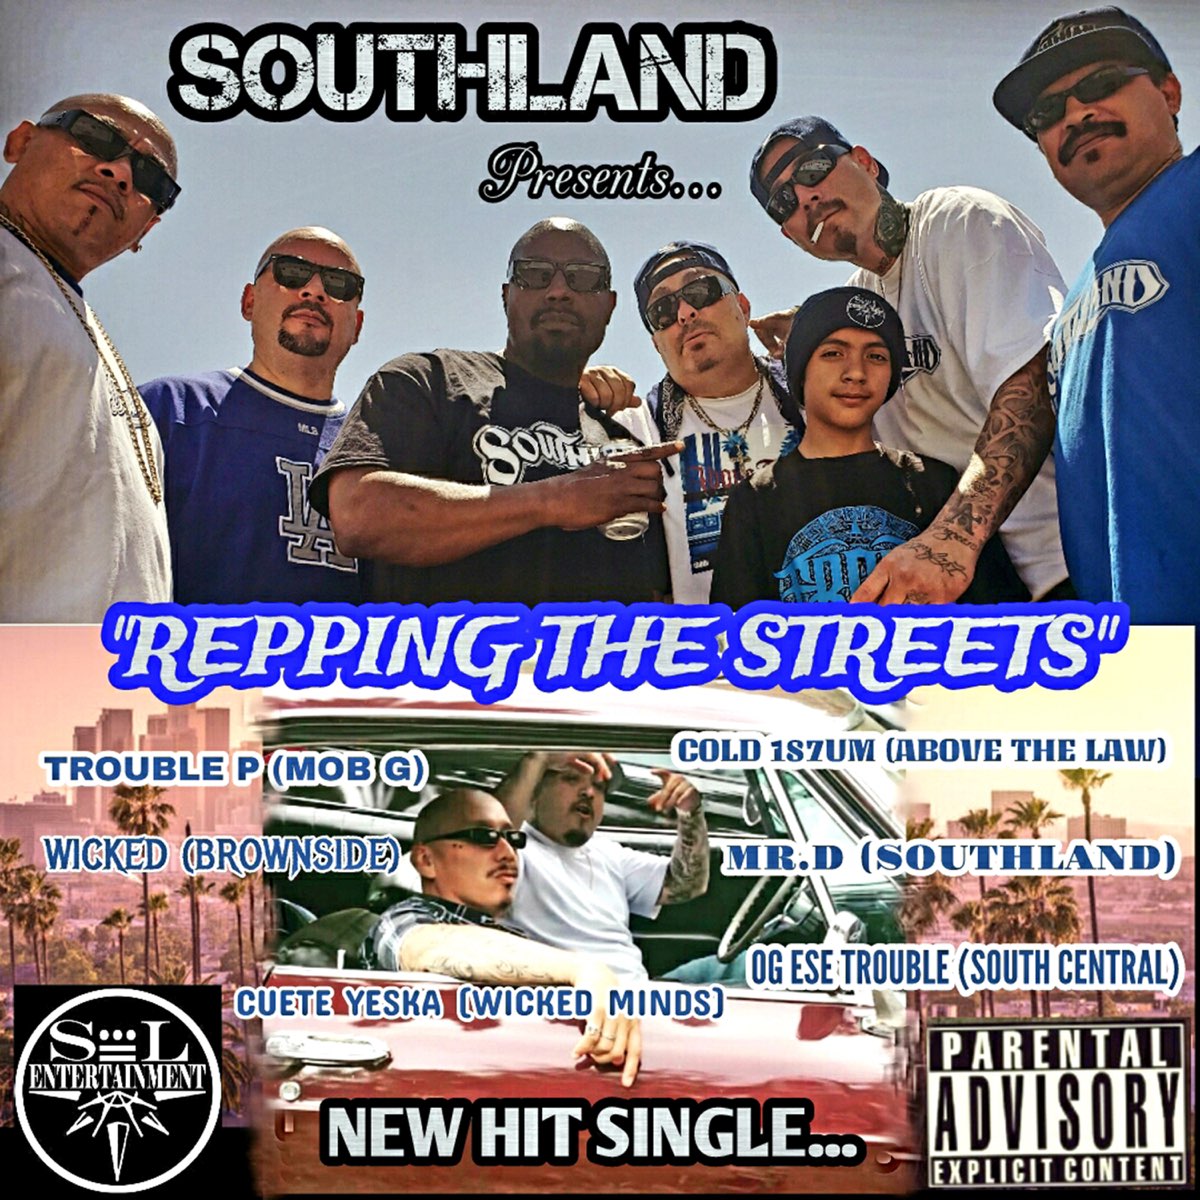 ‎Repping the Streets (feat. Wicked, Brownside, Cold 187um, Cuete 